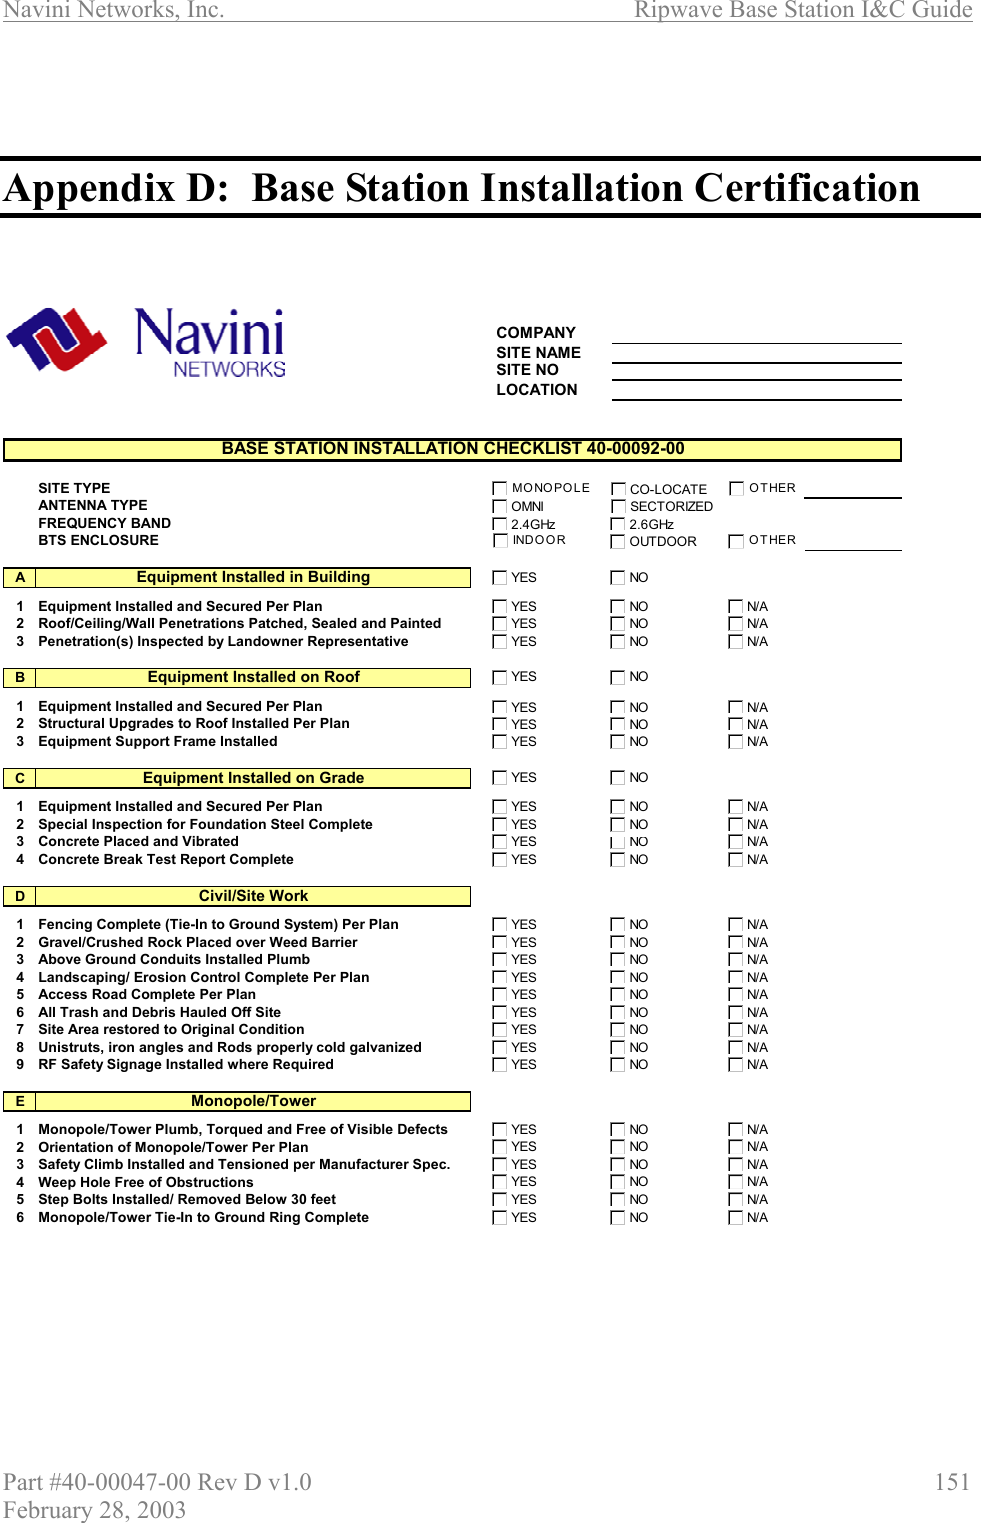 Navini Networks, Inc.                          Ripwave Base Station I&amp;C Guide Part #40-00047-00 Rev D v1.0                     151 February 28, 2003    Appendix D:  Base Station Installation Certification    COMPANYSITE NAMESITE NOLOCATIONSITE TYPEANTENNA TYPEFREQUENCY BANDBTS ENCLOSUREA1 Equipment Installed and Secured Per Plan2 Roof/Ceiling/Wall Penetrations Patched, Sealed and Painted3 Penetration(s) Inspected by Landowner RepresentativeB1 Equipment Installed and Secured Per Plan2 Structural Upgrades to Roof Installed Per Plan3 Equipment Support Frame InstalledC1 Equipment Installed and Secured Per Plan2 Special Inspection for Foundation Steel Complete3 Concrete Placed and Vibrated4 Concrete Break Test Report CompleteD1 Fencing Complete (Tie-In to Ground System) Per Plan2 Gravel/Crushed Rock Placed over Weed Barrier3 Above Ground Conduits Installed Plumb4 Landscaping/ Erosion Control Complete Per Plan5 Access Road Complete Per Plan6 All Trash and Debris Hauled Off Site7 Site Area restored to Original Condition8 Unistruts, iron angles and Rods properly cold galvanized9 RF Safety Signage Installed where RequiredE1 Monopole/Tower Plumb, Torqued and Free of Visible Defects2 Orientation of Monopole/Tower Per Plan3 Safety Climb Installed and Tensioned per Manufacturer Spec.4 Weep Hole Free of Obstructions5 Step Bolts Installed/ Removed Below 30 feet6 Monopole/Tower Tie-In to Ground Ring CompleteBASE STATION INSTALLATION CHECKLIST 40-00092-00Equipment Installed in BuildingEquipment Installed on RoofEquipment Installed on GradeCivil/Site WorkMonopole/TowerYES NON/AYES NON/AYES NON/AYES NOYES NON/AYES NON/AYES NON/AYES NOYES NON/AYES NON/AYESN/AYES NON/AYES NONON/AYES NON/AYES NON/AYES NON/AYES NON/AYES NON/AYES NON/AYES NON/AYES NON/AYES NON/AYES NON/AYES NON/AYES NON/AYES NON/AYES NON/AYES NOMONOPOLE CO-LOCATEOMNI SECTORIZED2.4GHz 2.6GHzIND O O R OUTDOOROTHEROTHER